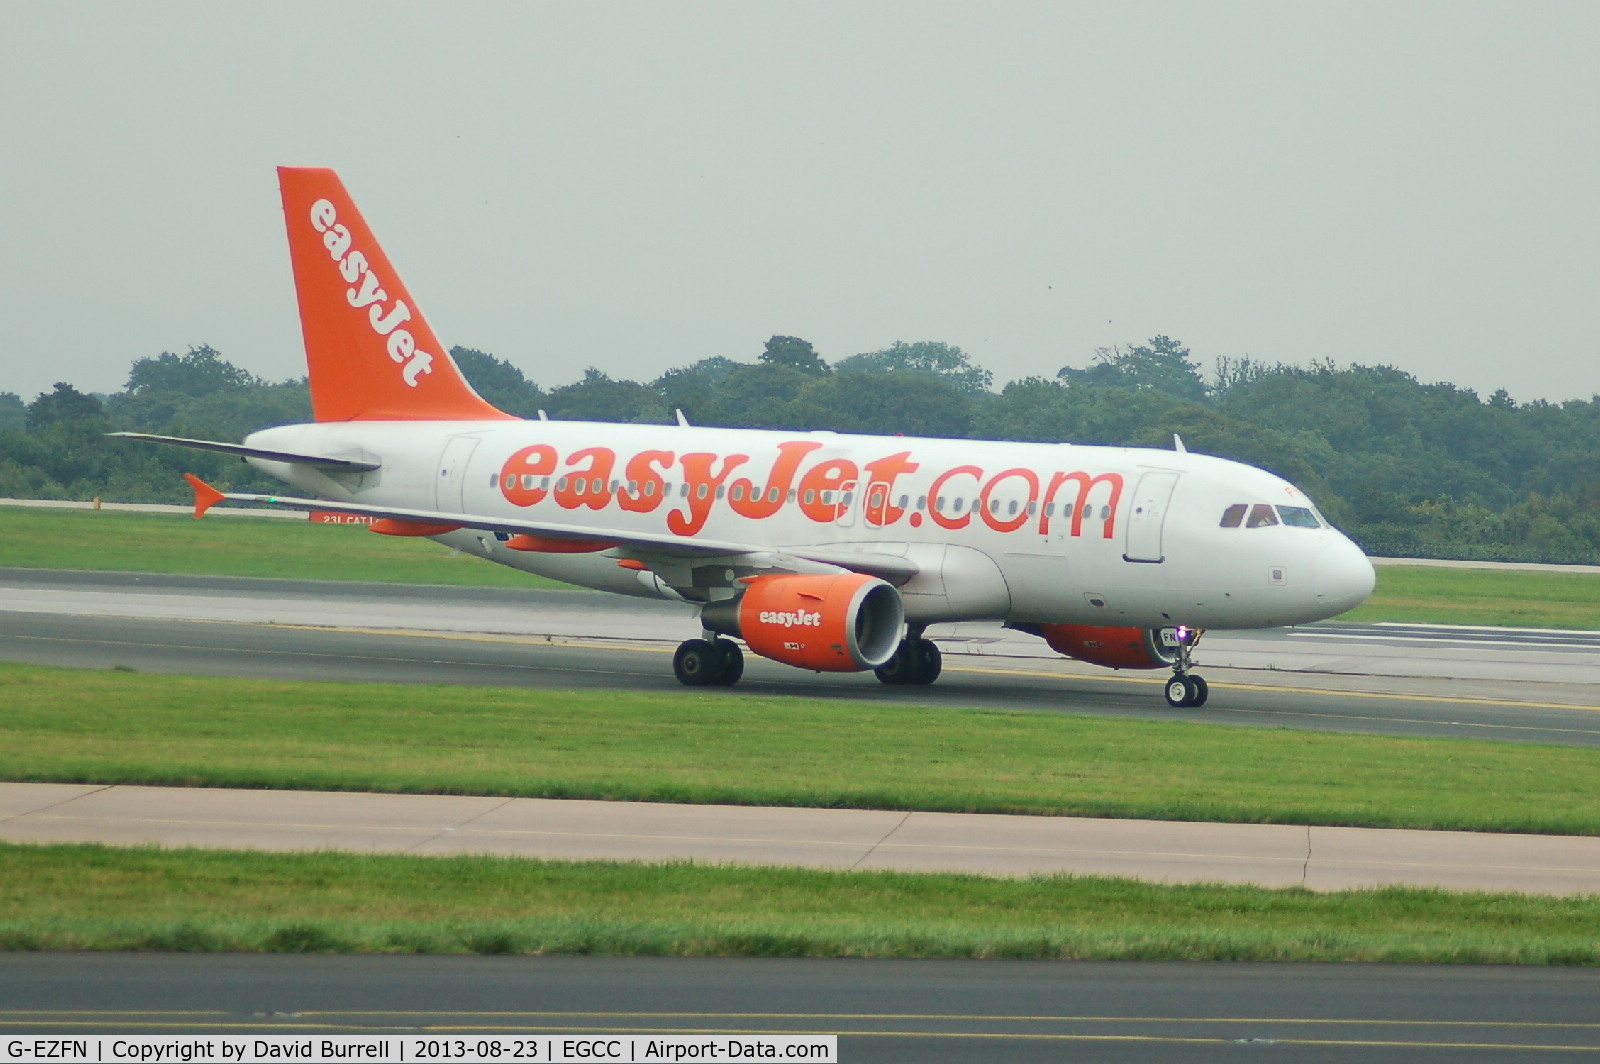 G-EZFN, 2009 Airbus A319-111 C/N 4076, Easyjet Airbus A319-111 taxiing at Manchester Airport.